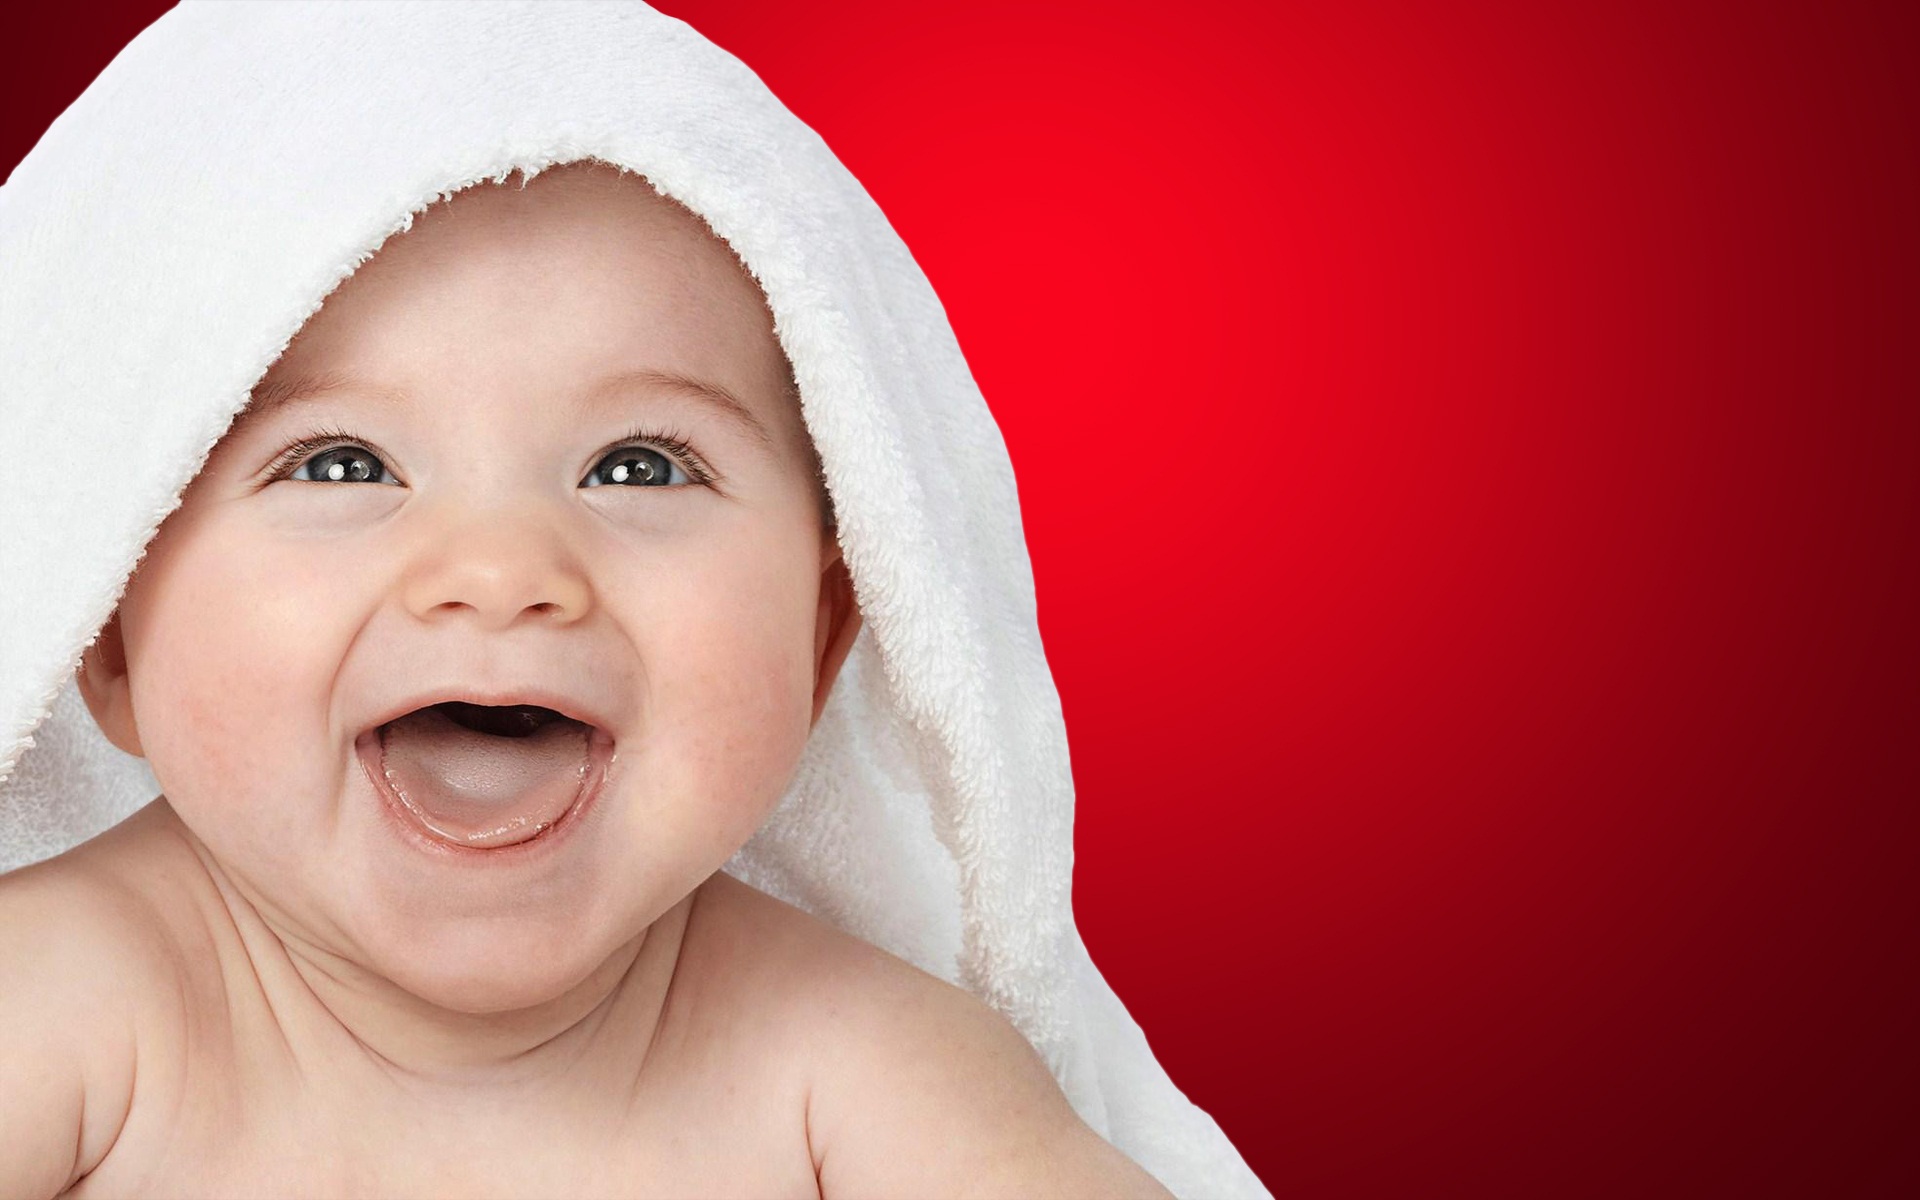 559099 1920x1080 baby pc backgrounds hd free JPEG 293 kB  Rare Gallery HD  Wallpapers